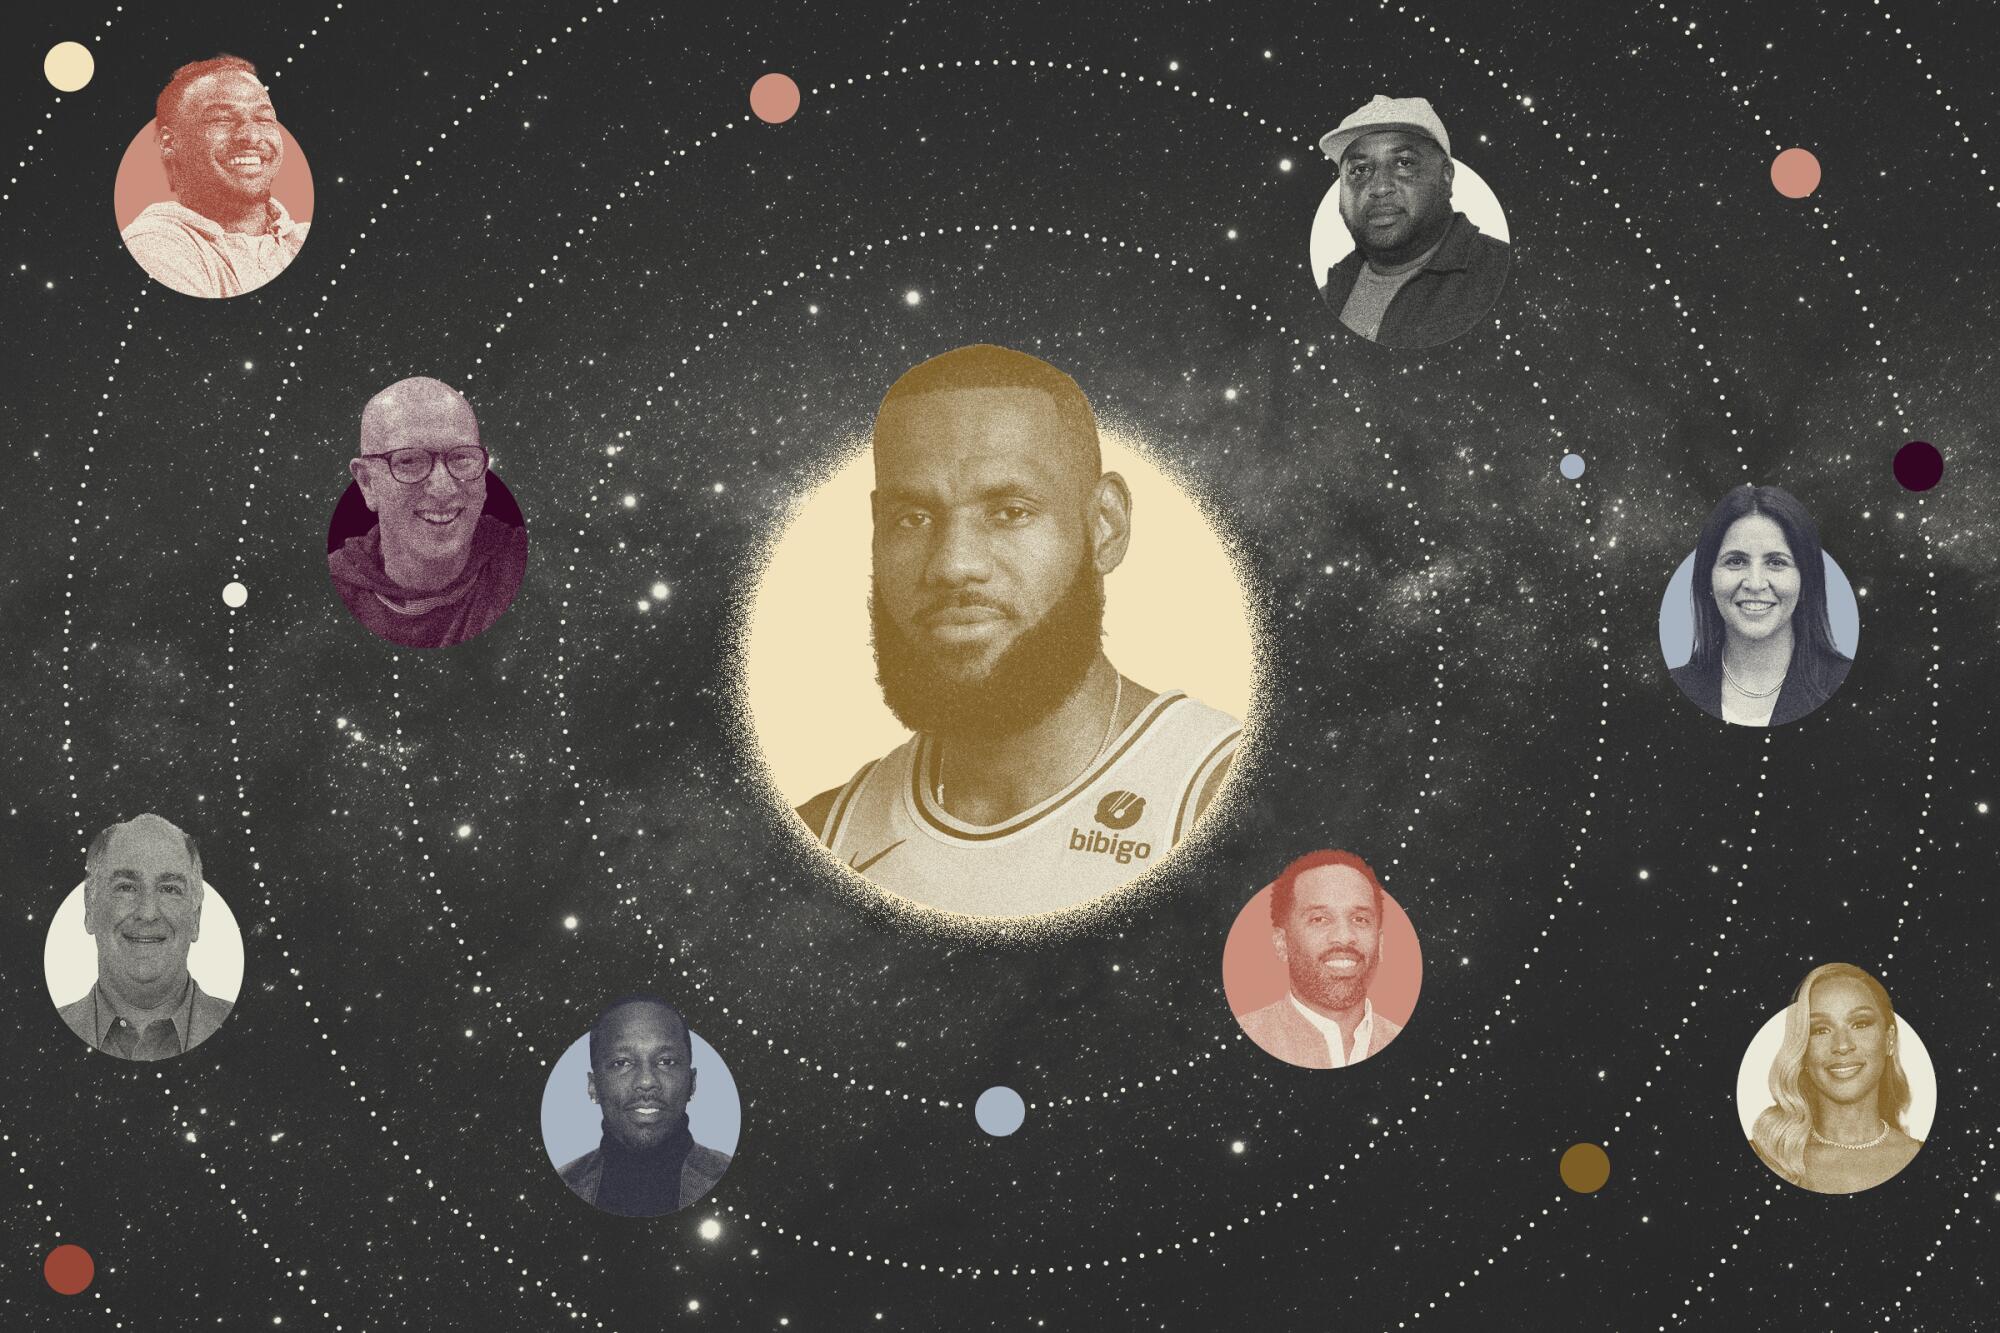 LeBron James, center, surrounded by others in his solar system